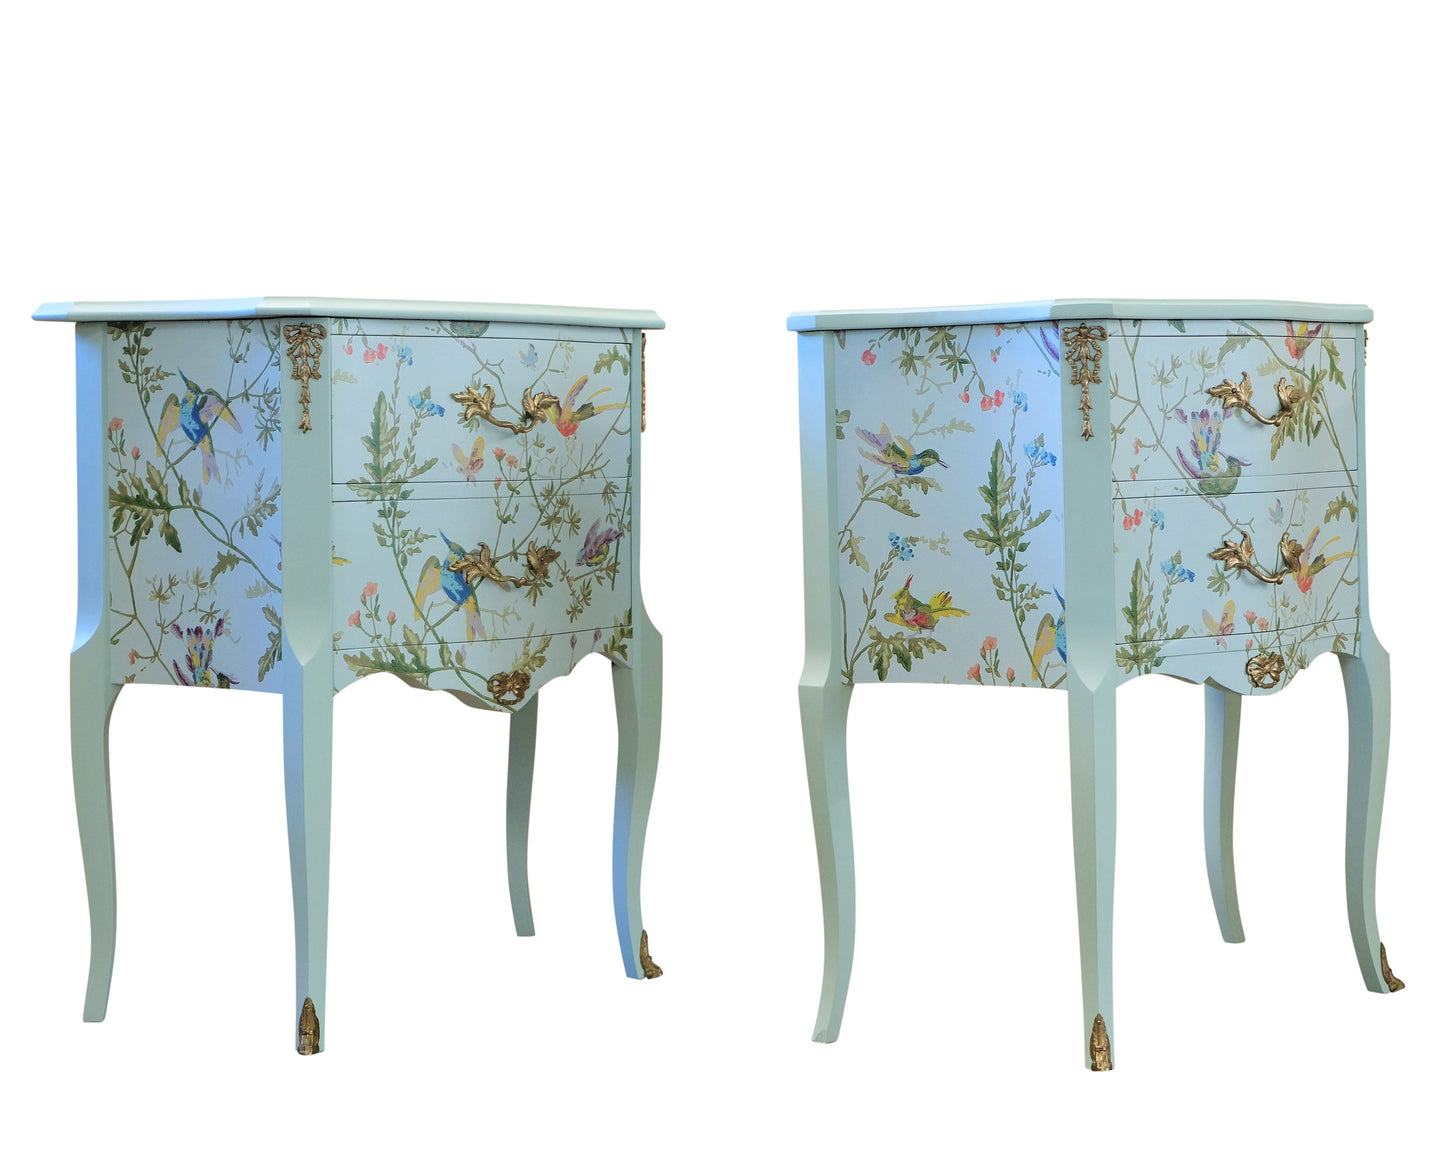 A Pair of Louis XV Style Bedside Tables with Floral Design and Marble Tops